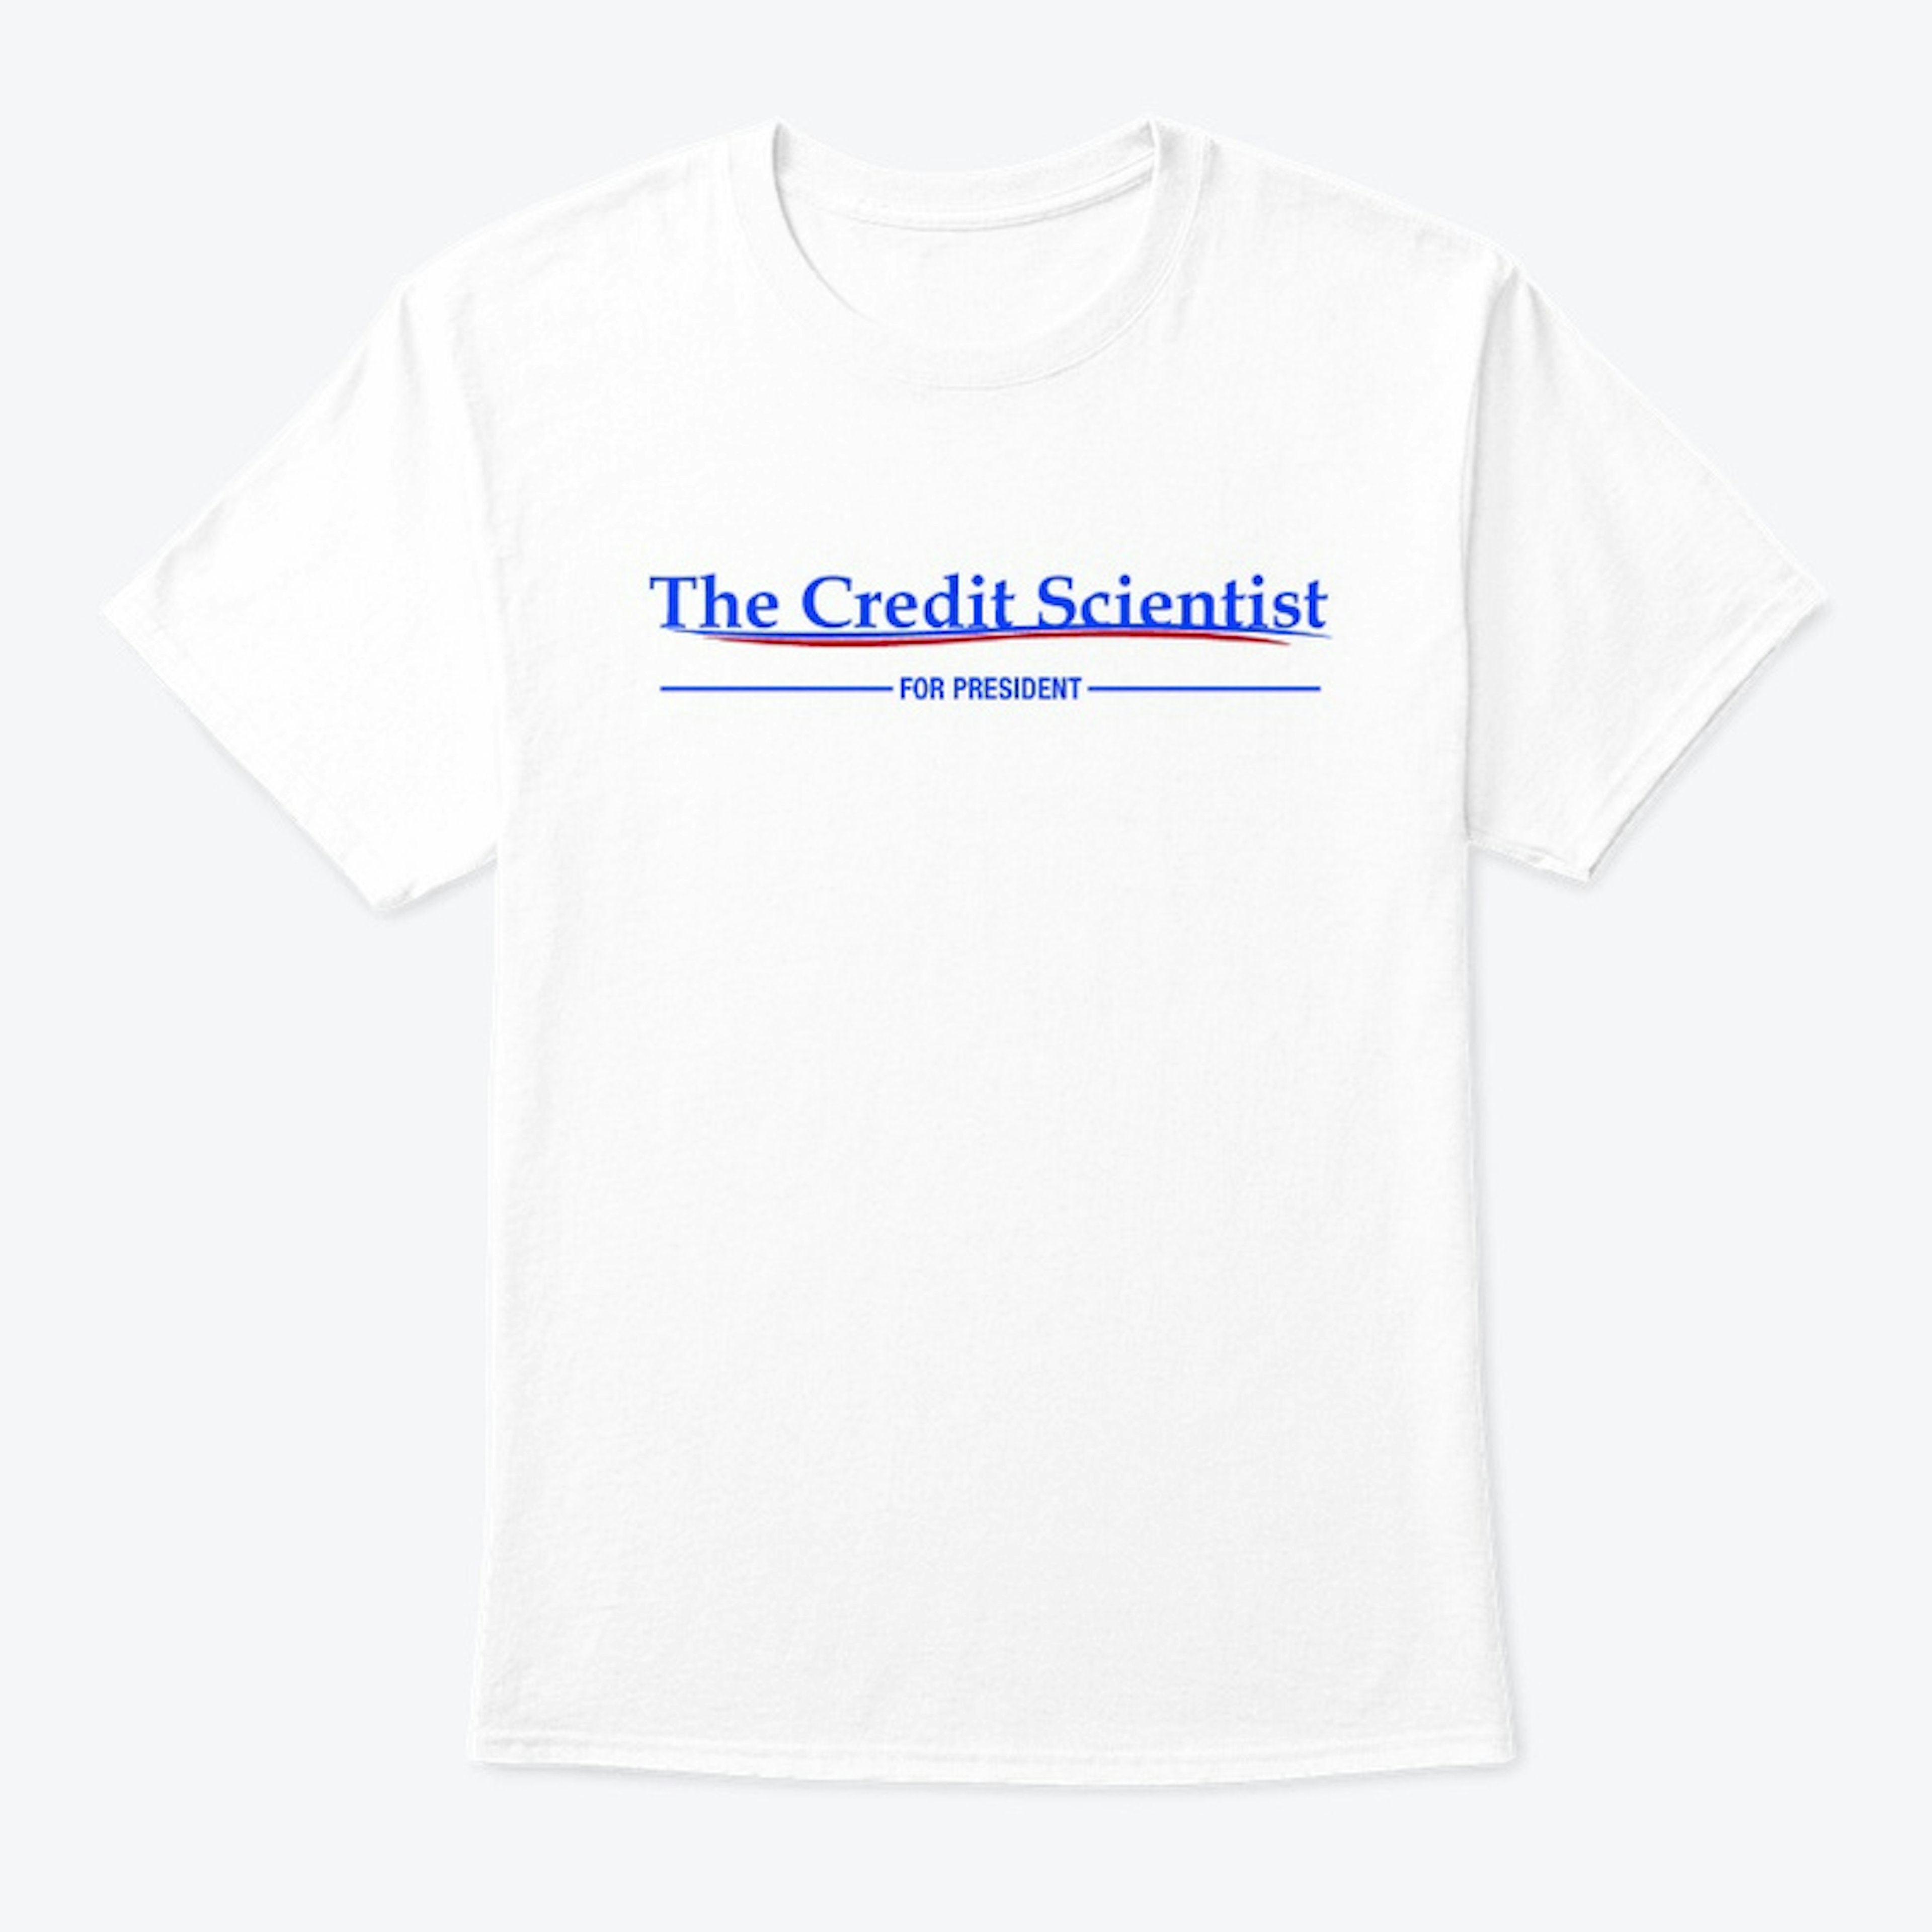 The Credit Scientist for President